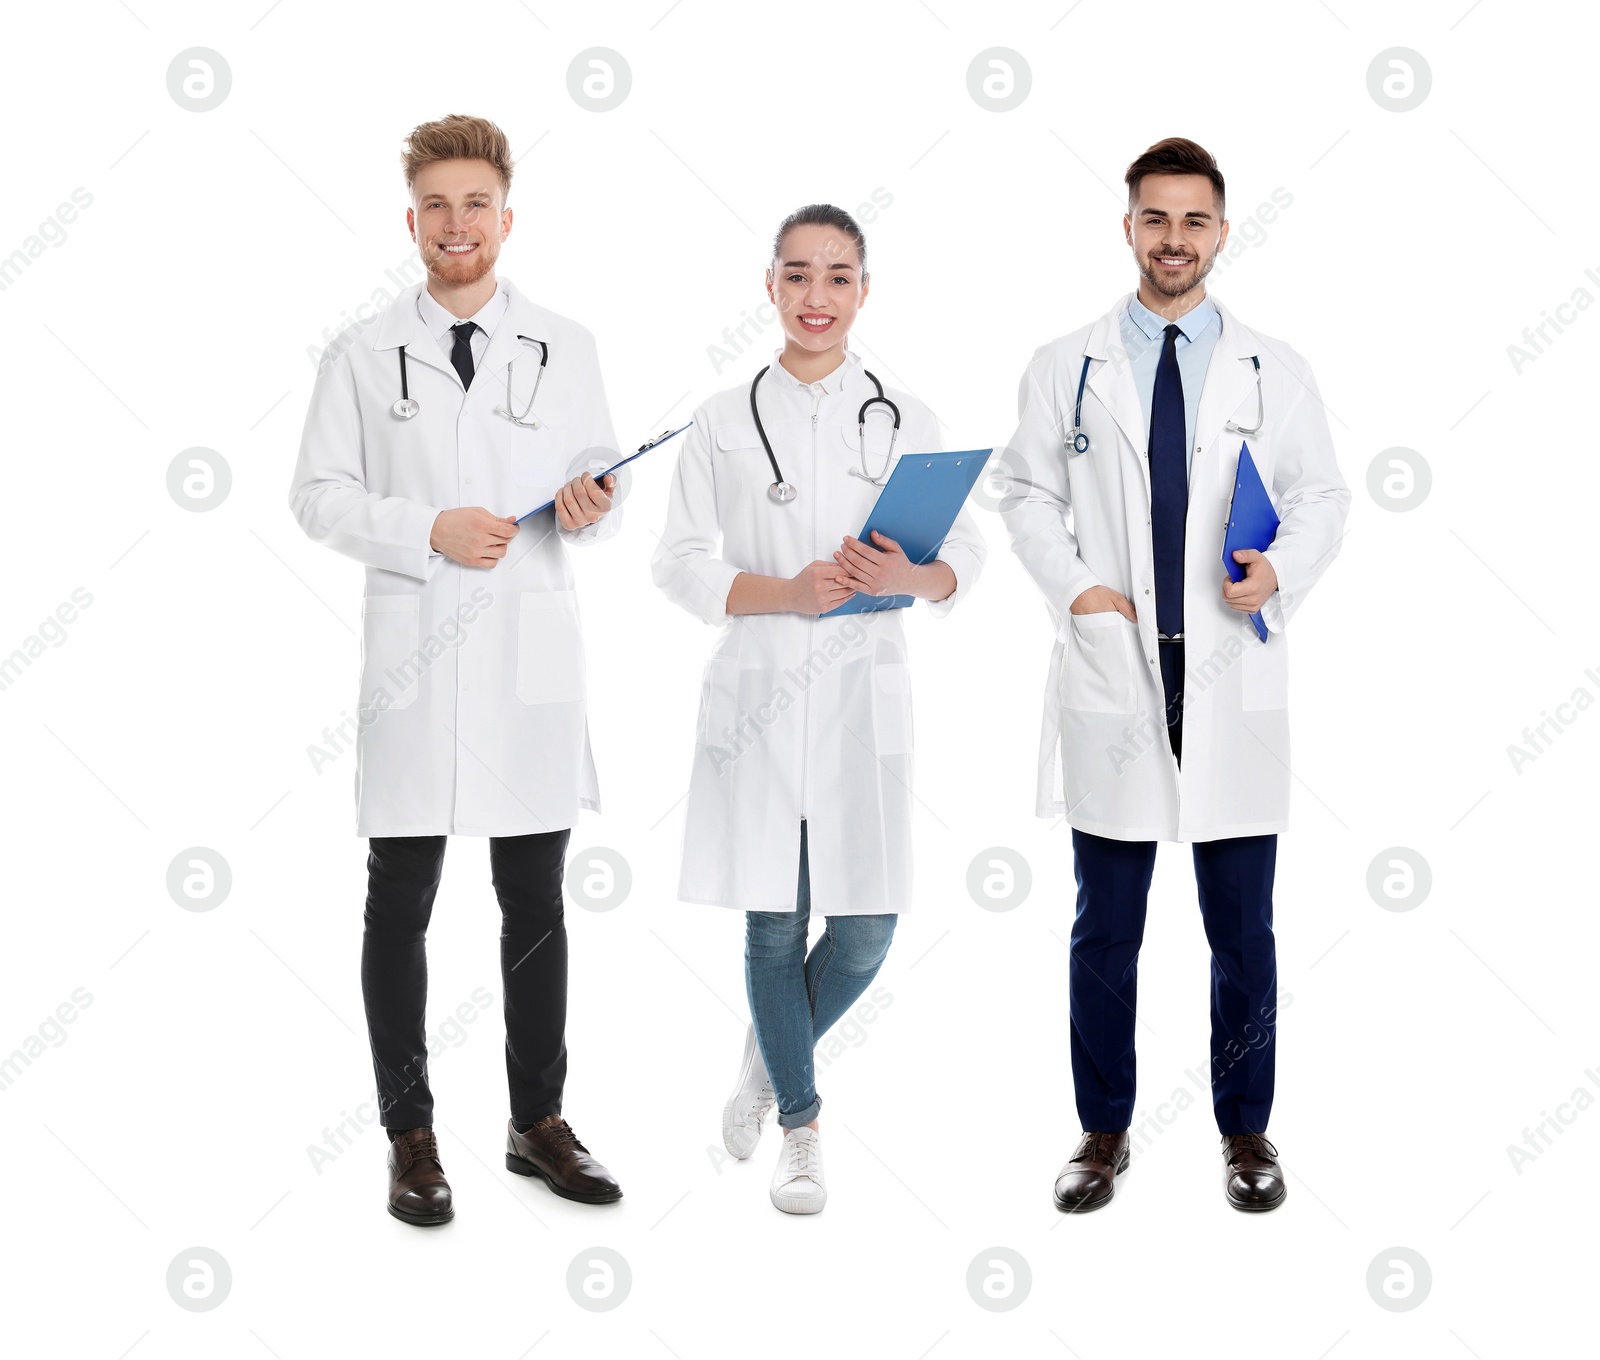 Image of Collage with photos of young doctors on white background